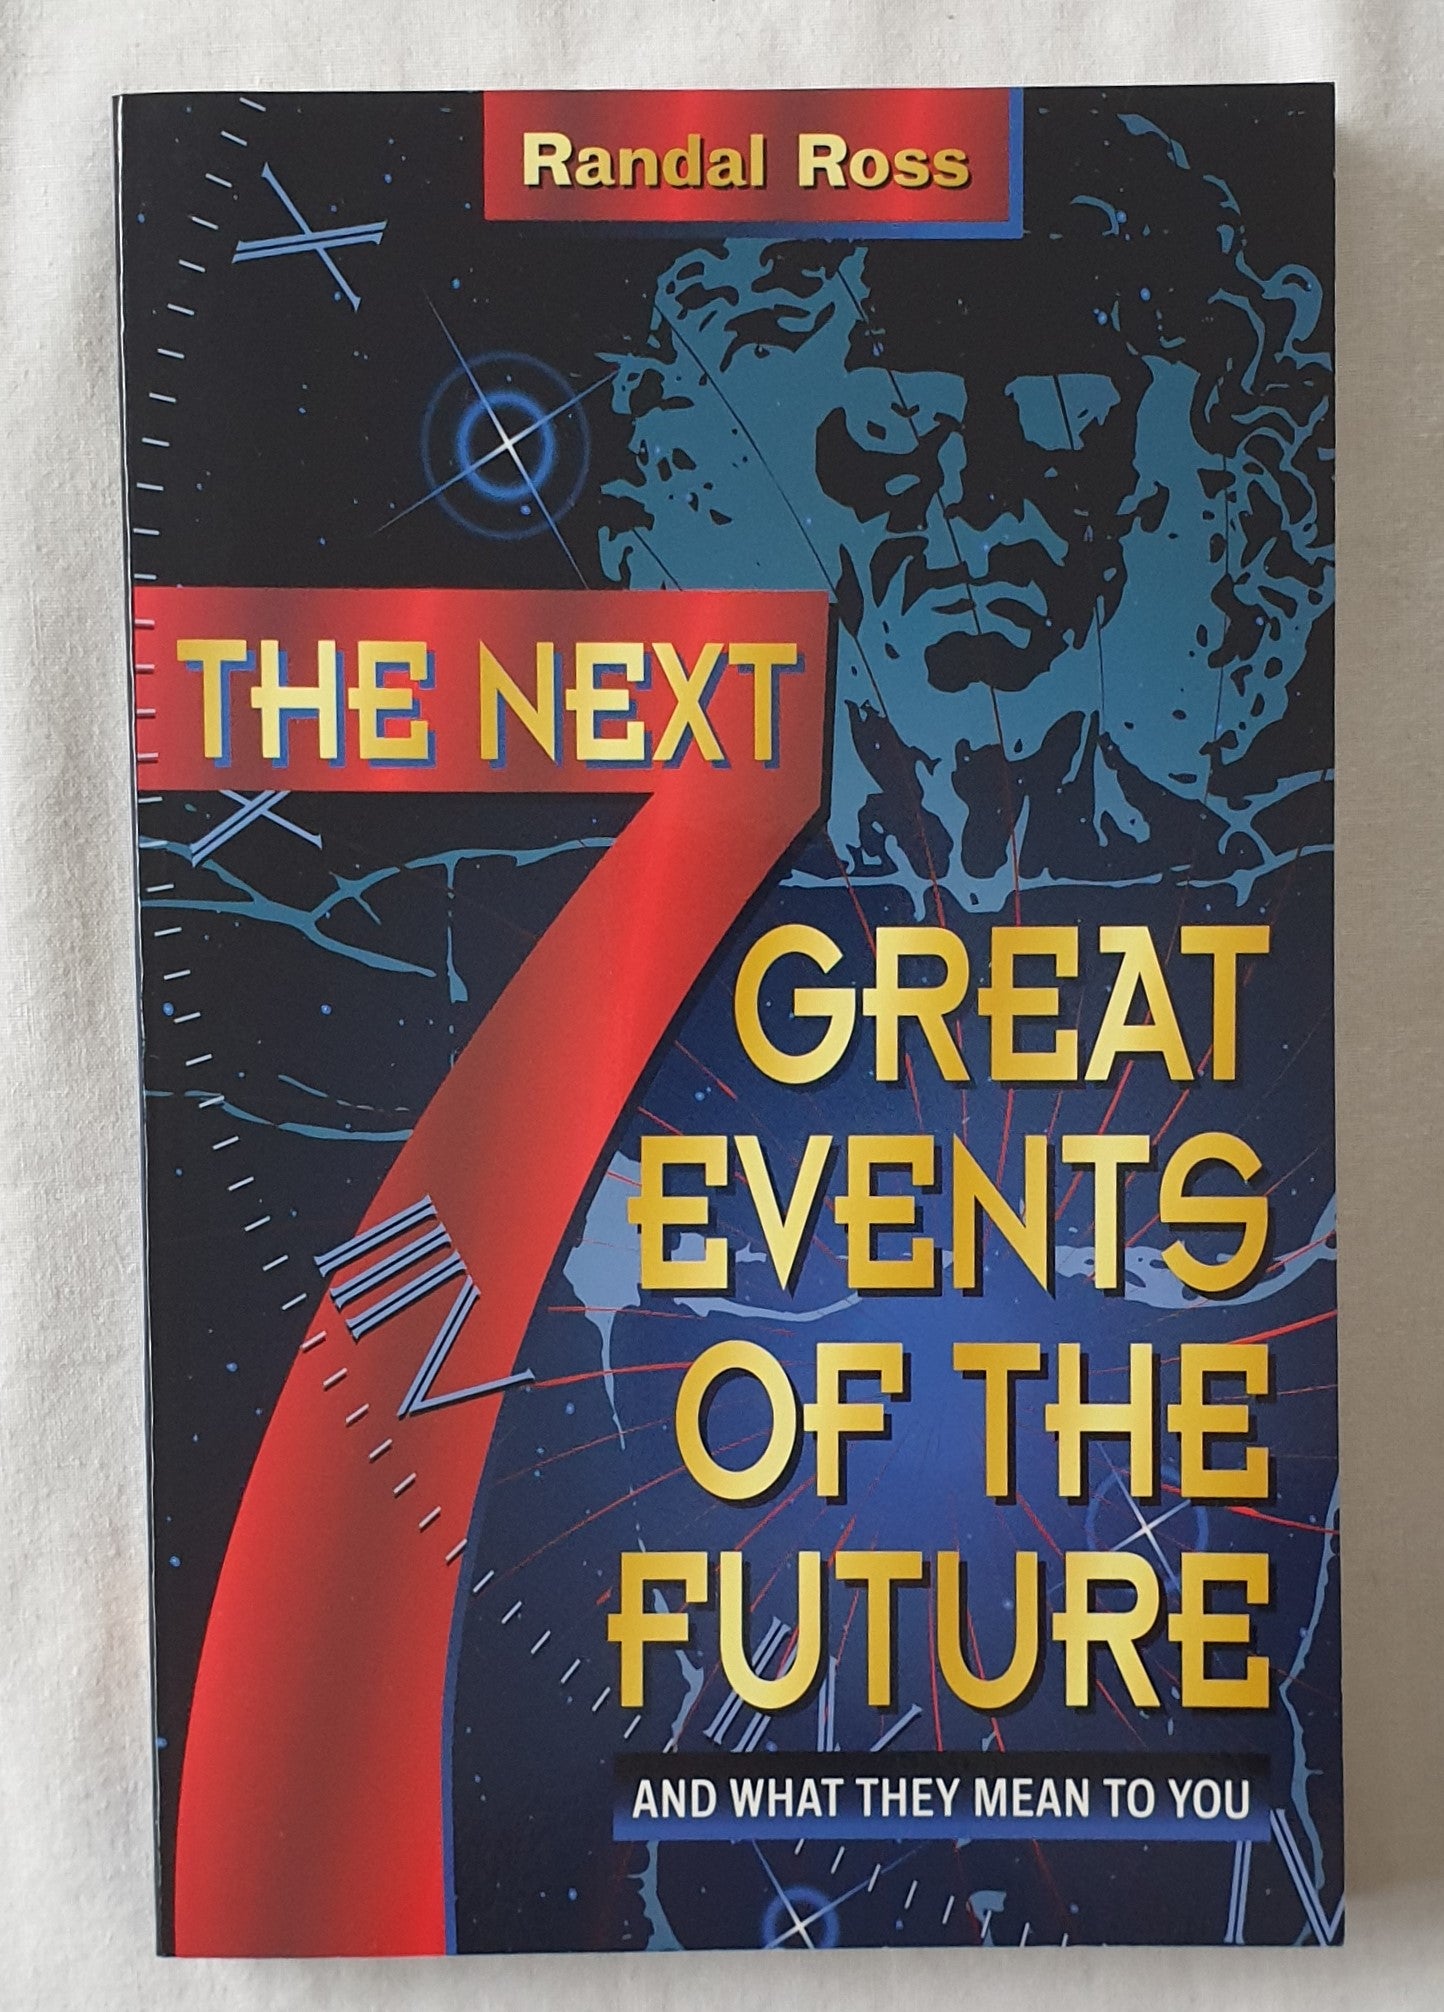 The Next 7 Great Events of the Future by Randal Ross